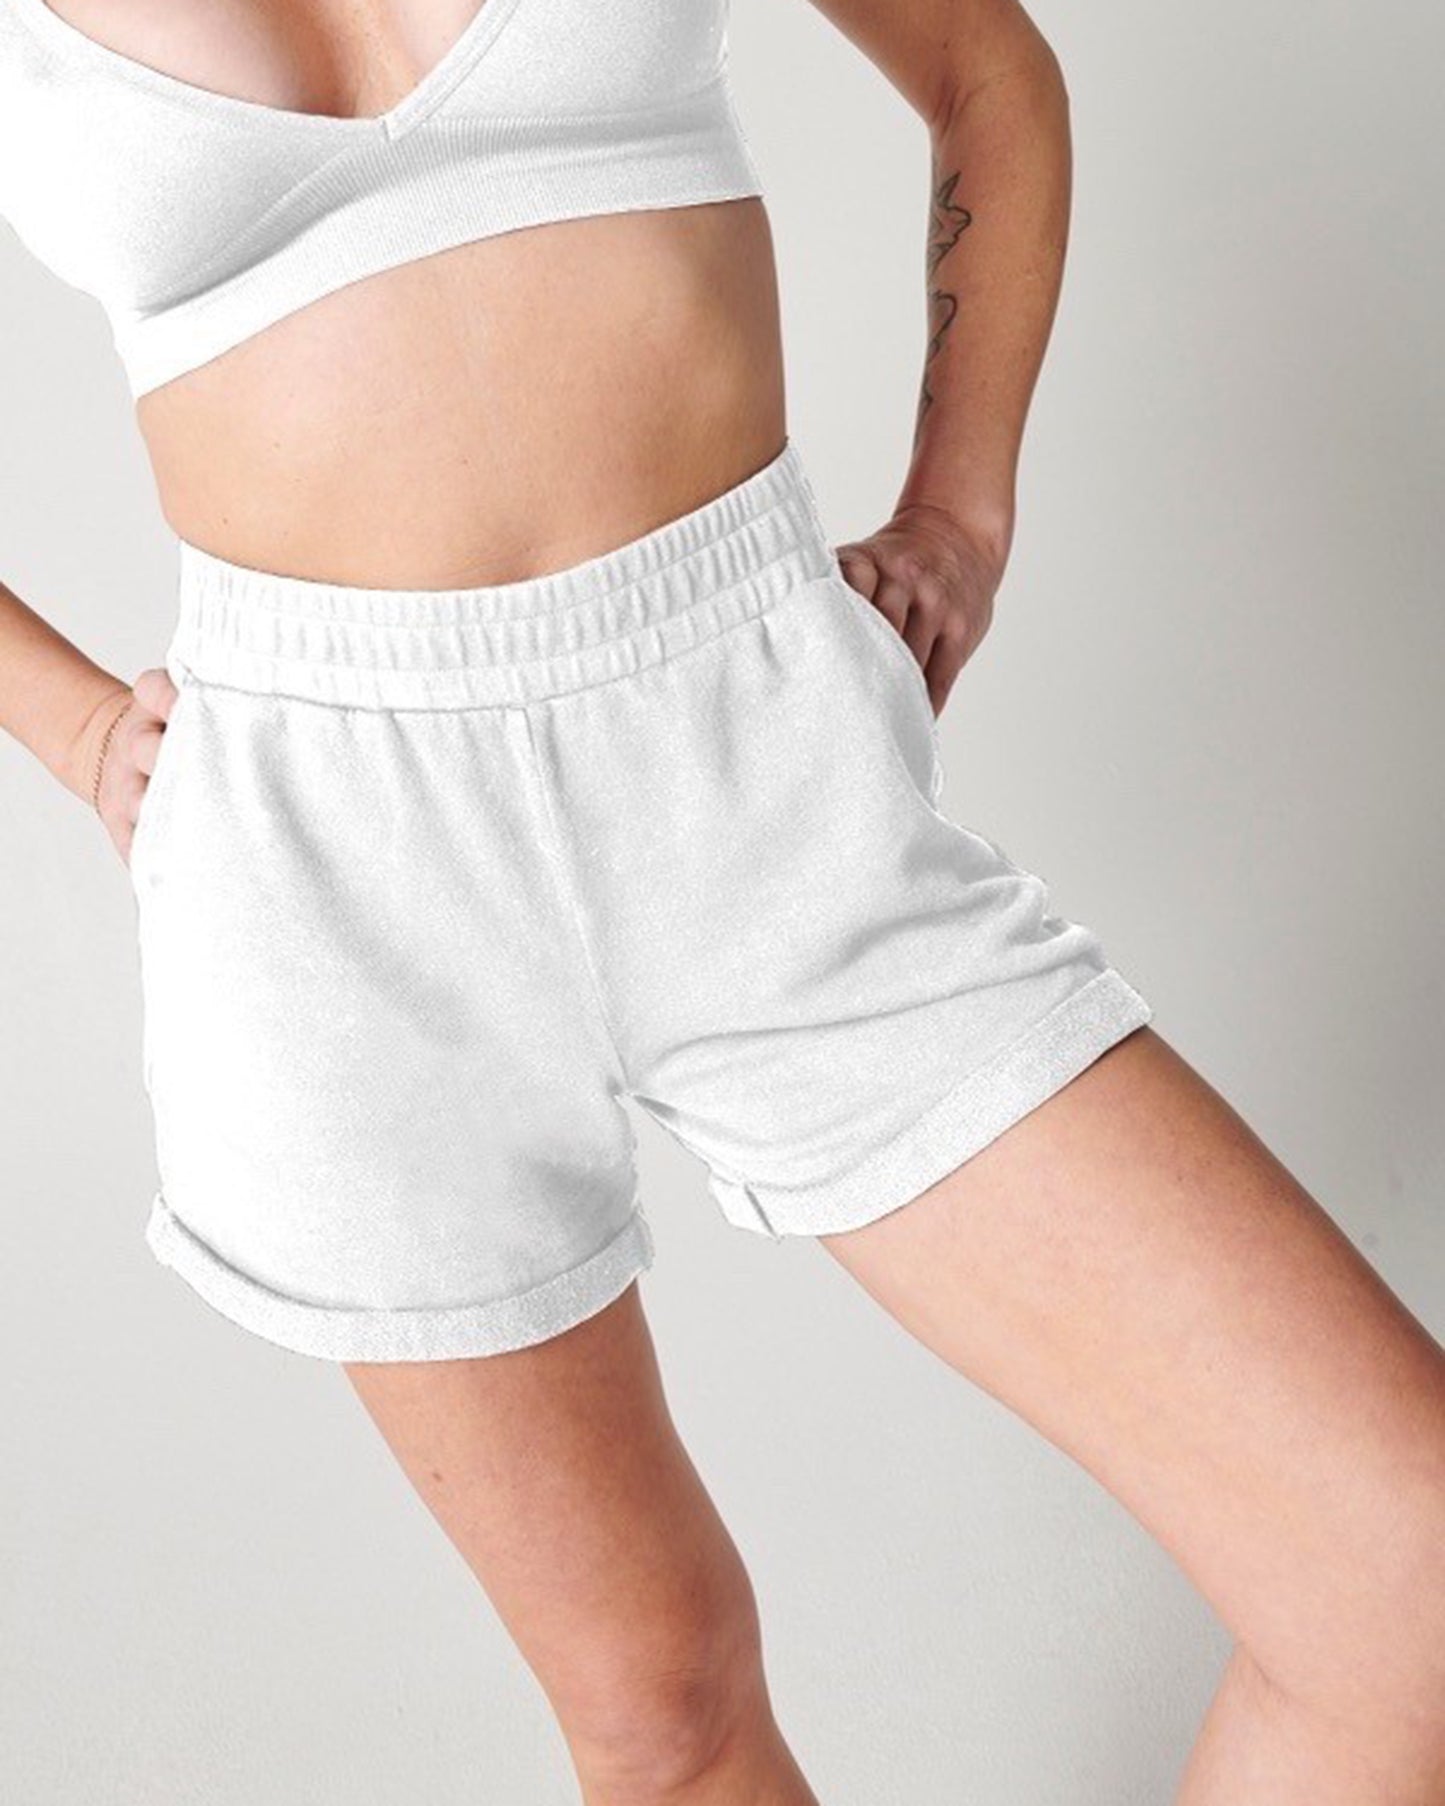 White organic cotton sweat shorts and white bra on woman's body with hands on hips